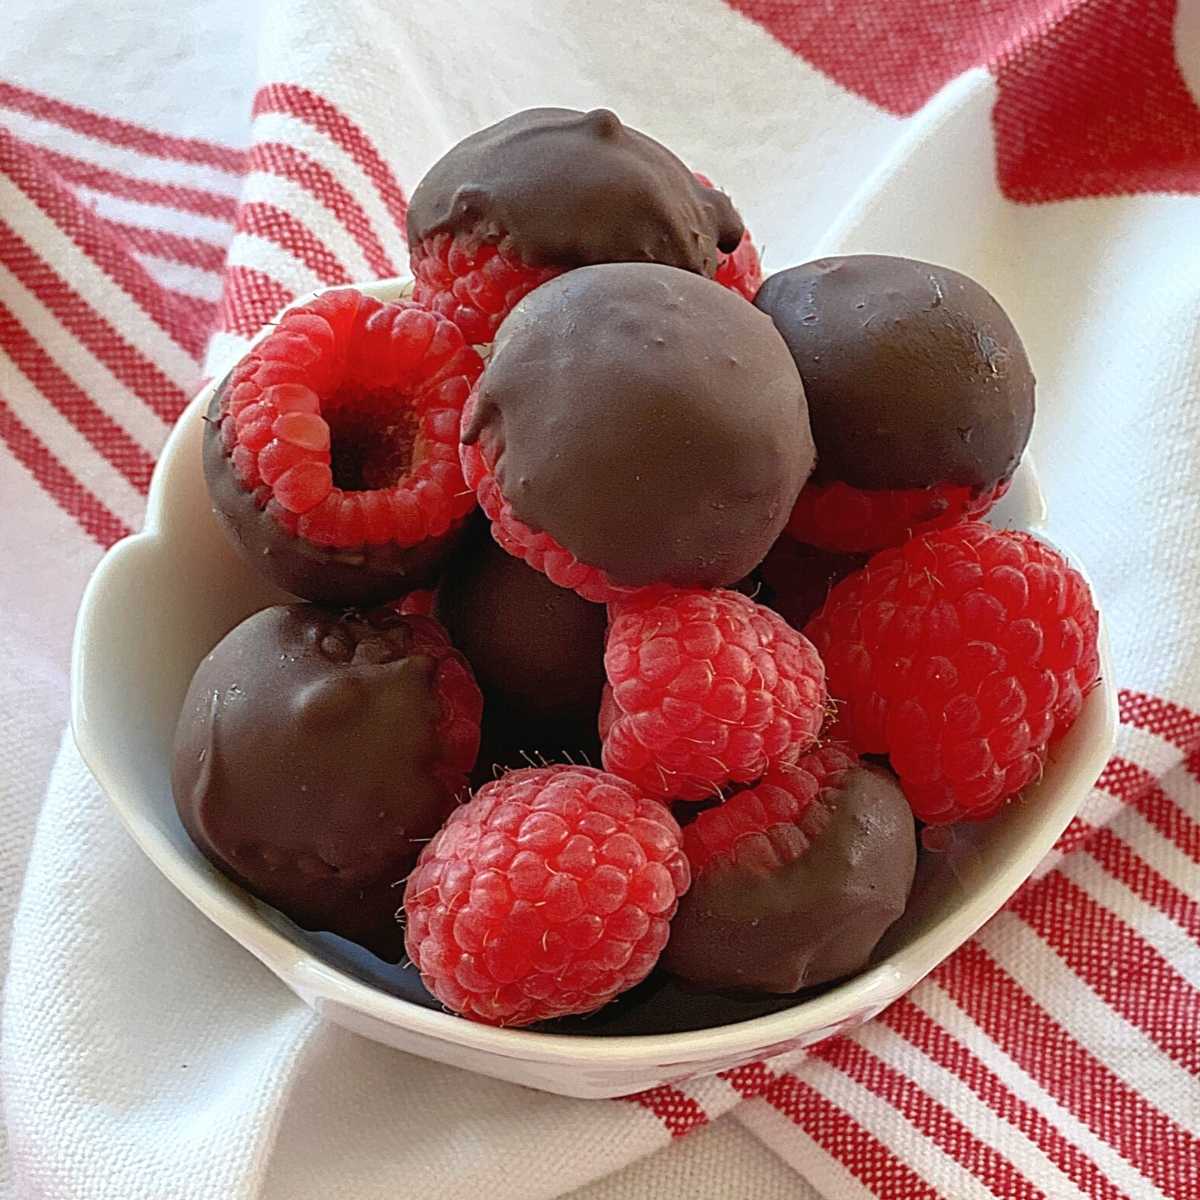 Bowl with frozen chocolate covered raspberries with a few undipped raspberries too.